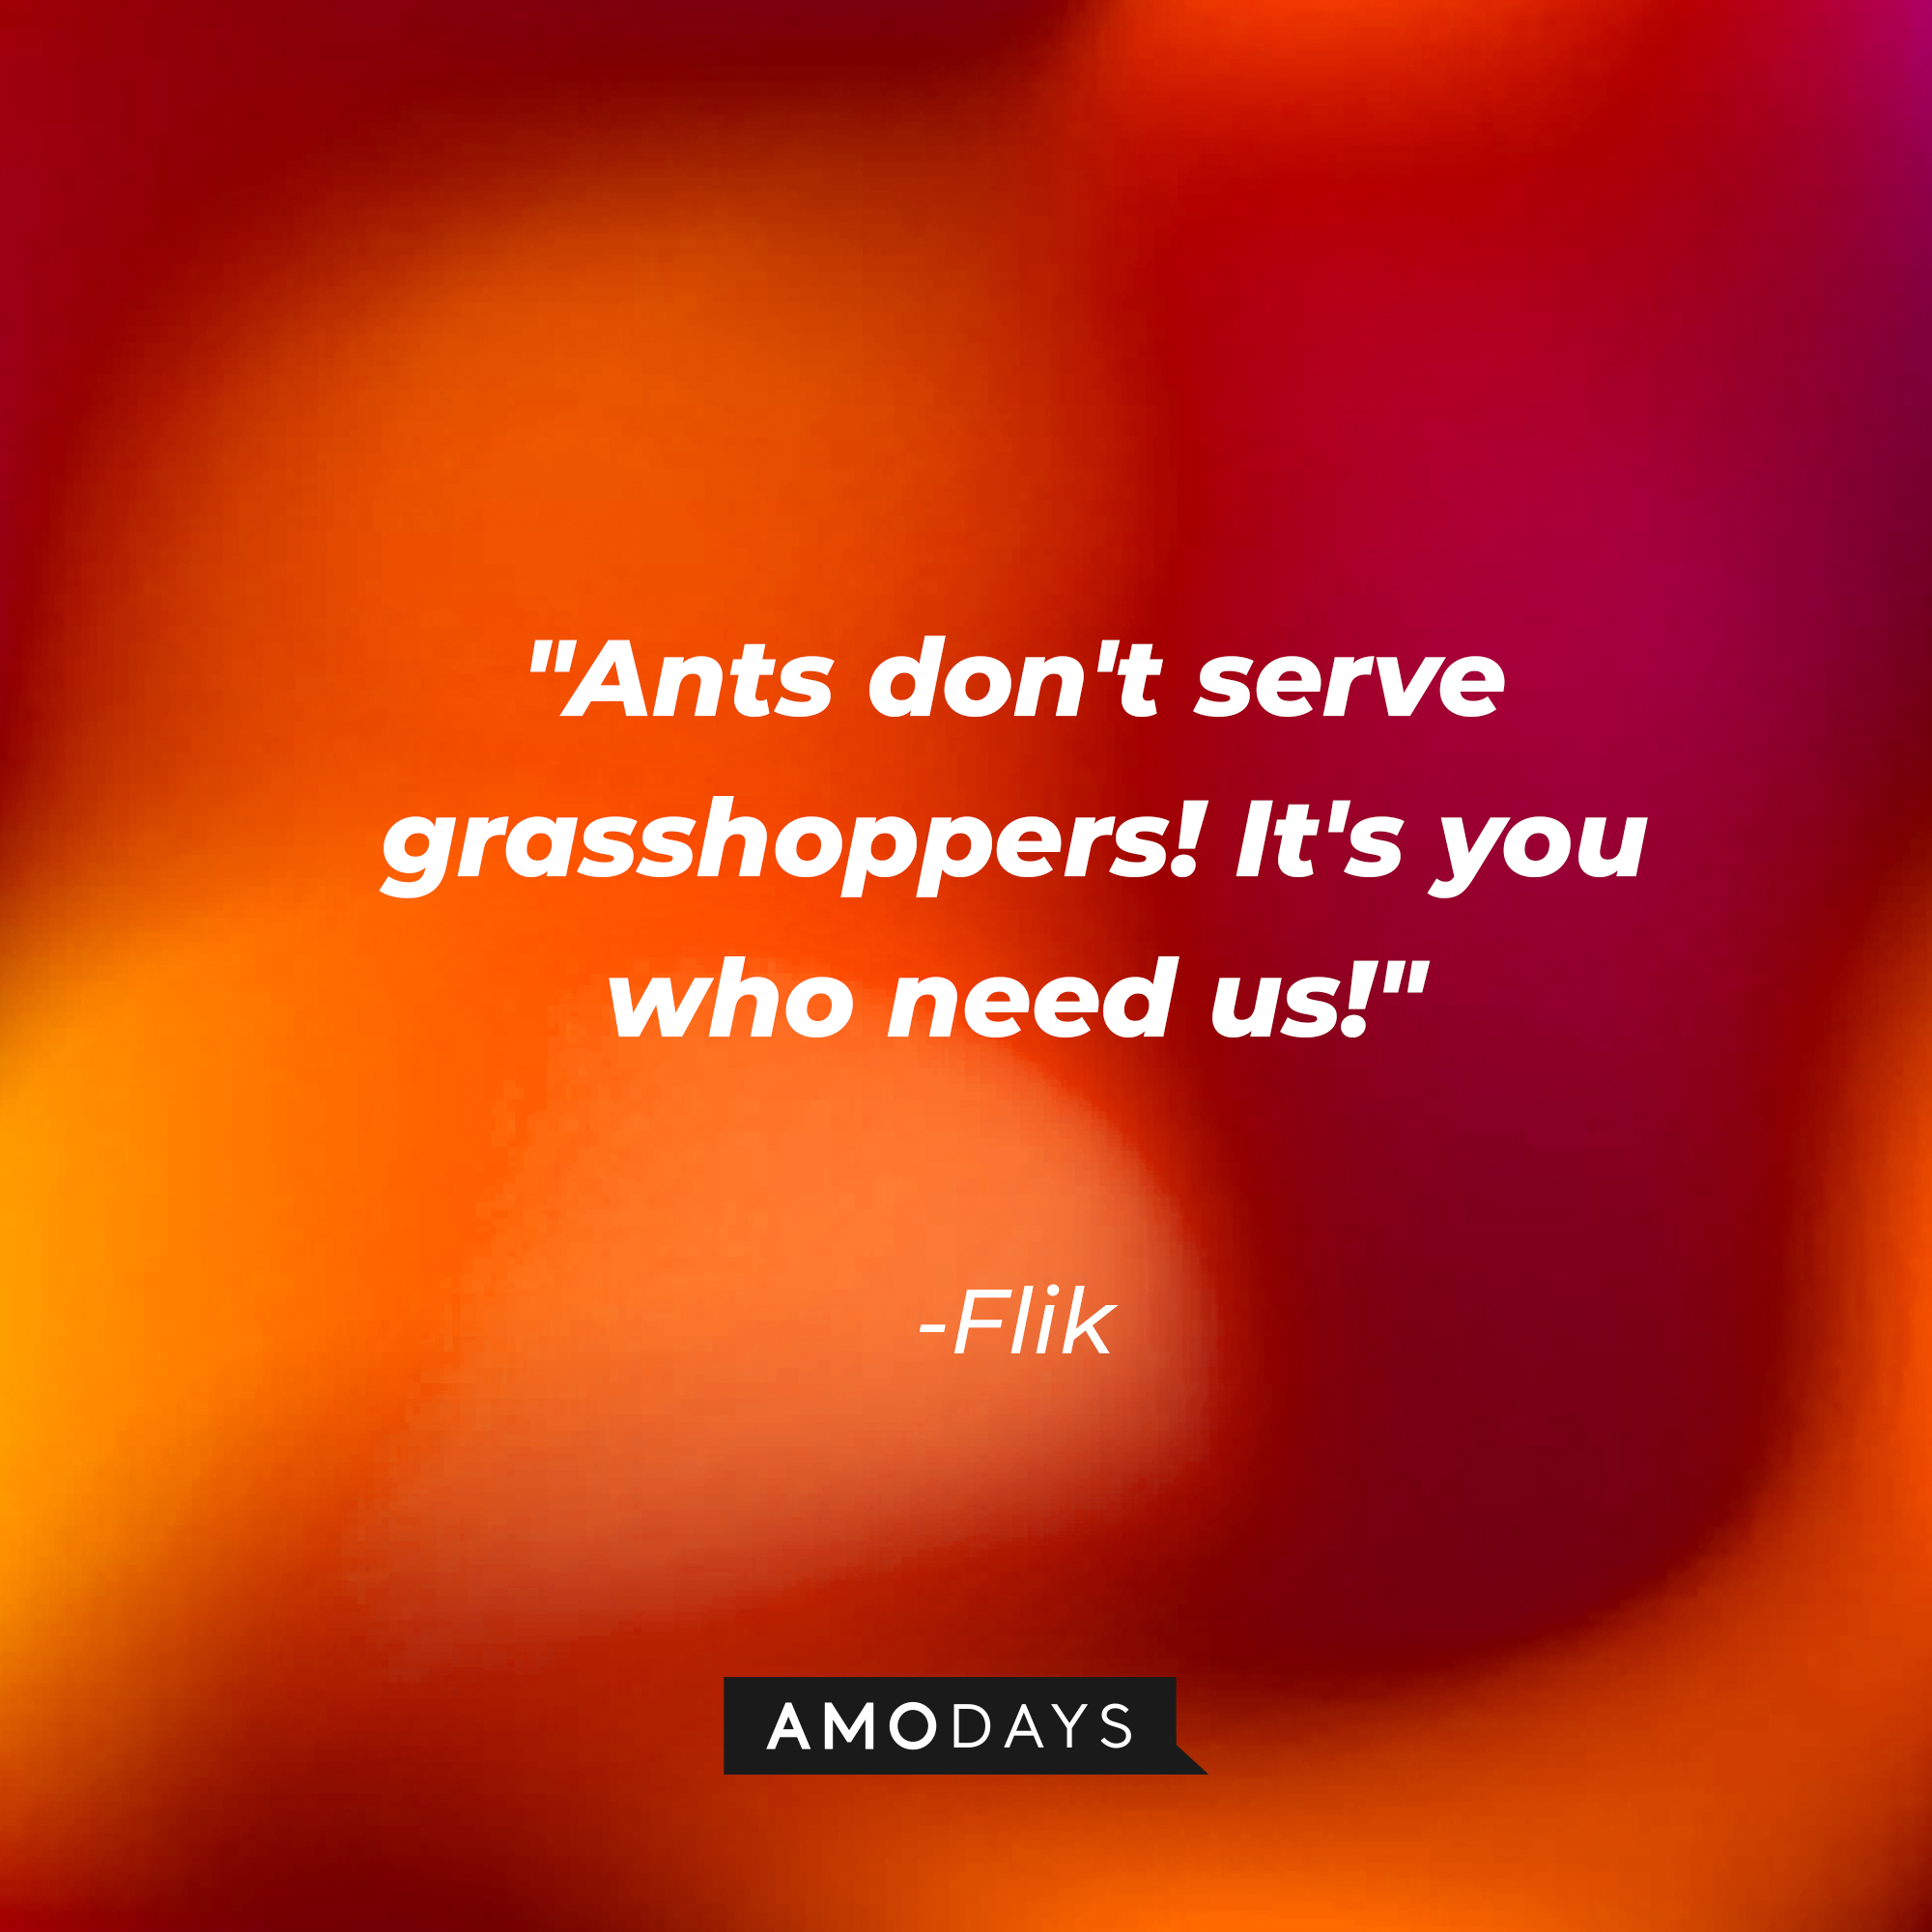 Flik's quote: "Ants don't serve grasshoppers! It's you who need us!" | Source: AmoDays